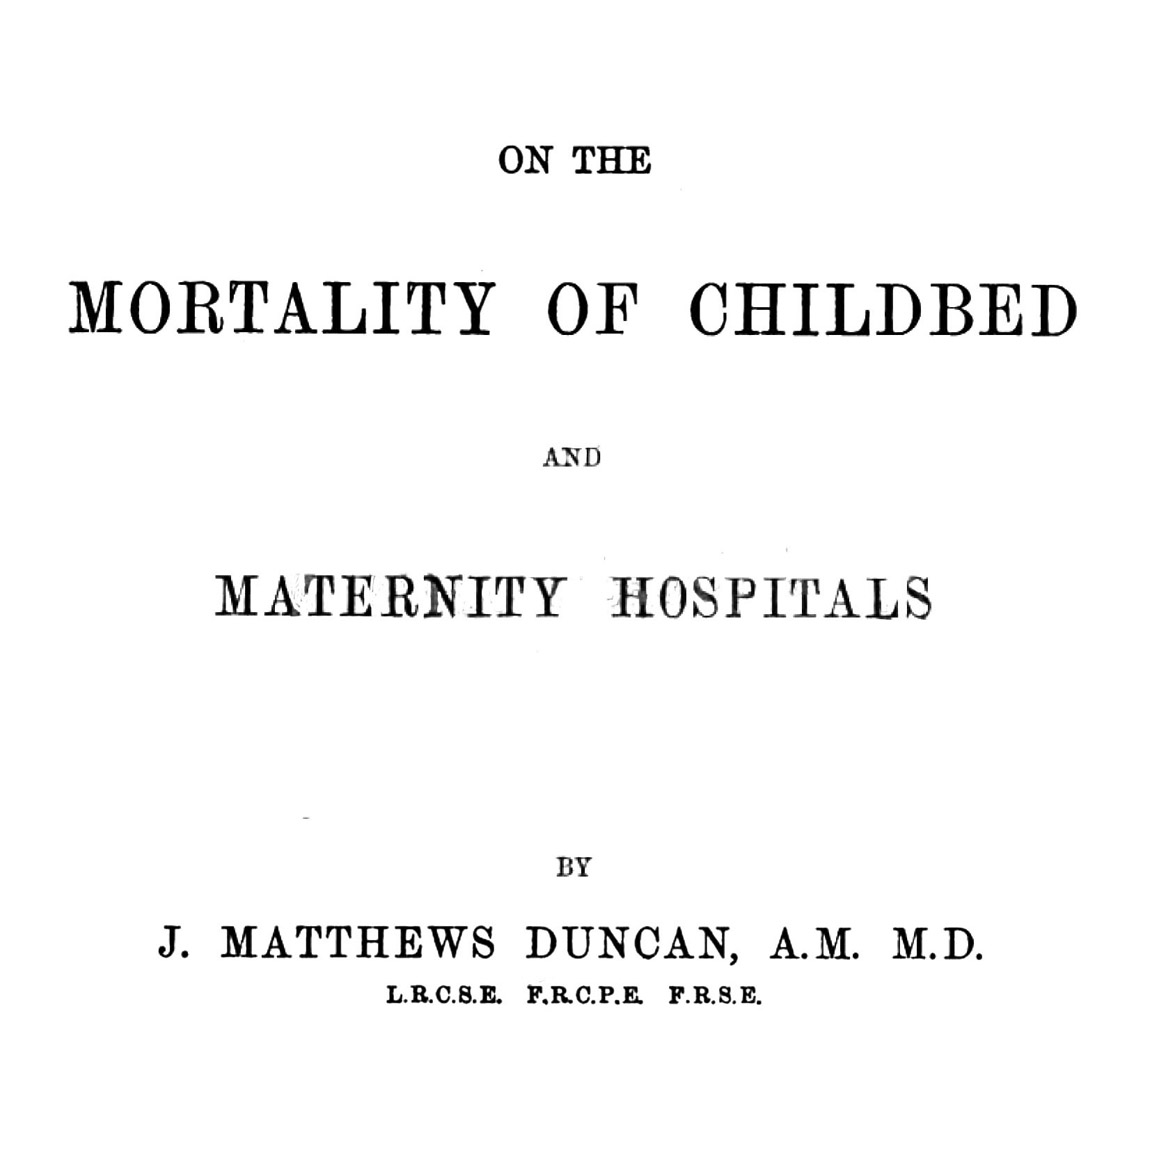 1870-DUNCAN-Mortality-Childbed-Maternity-Hospitals-title